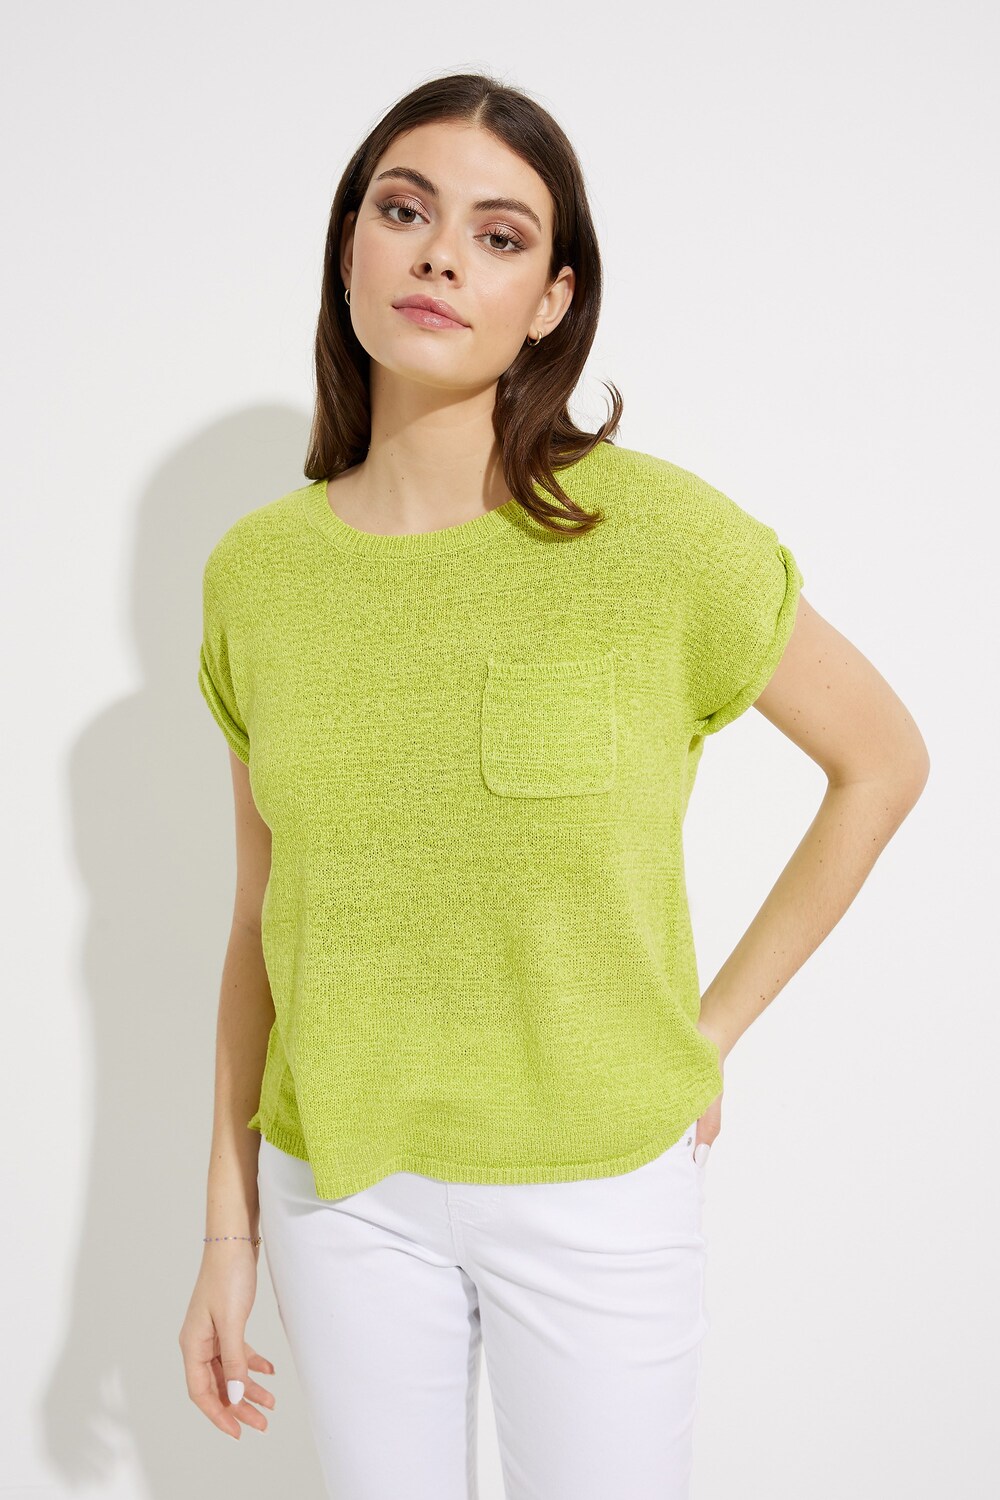 Short Sleeve Knit Top Style 232927. Exotic Lime